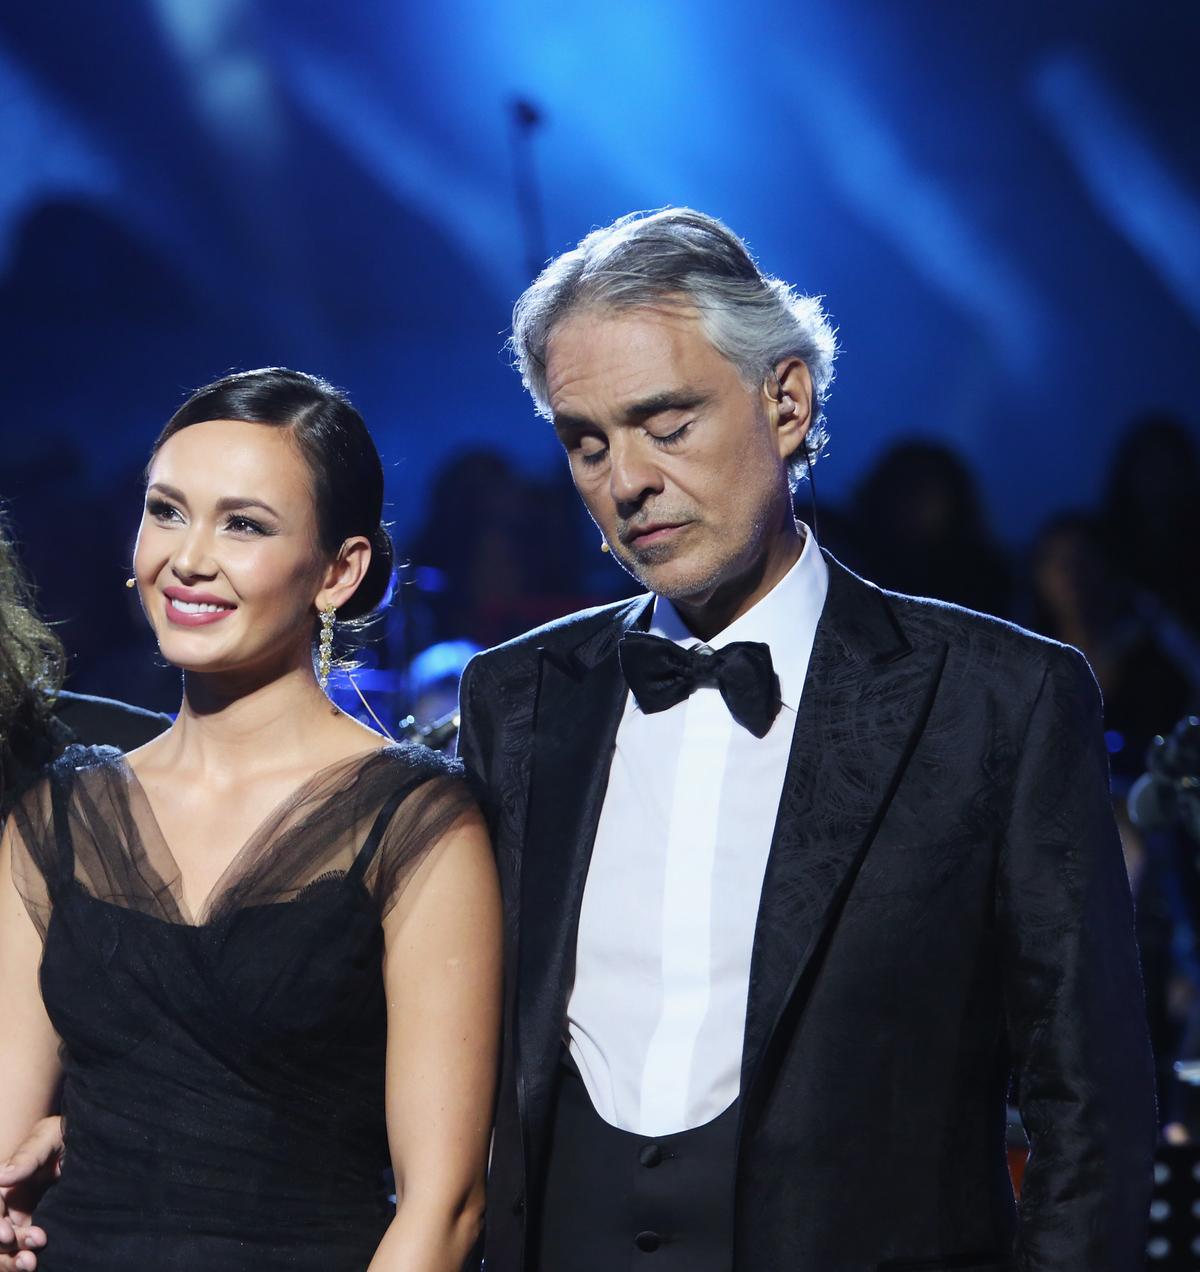 Aida Garifullina and Andrea Bocelli perform as part of the 2017 Celebrity Fight Night in Italy. (©Getty Images | <a href="https://www.gettyimages.com/detail/news-photo/steve-tyler-aida-garifullina-and-andrea-bocelli-perform-at-news-photo/845056800?adppopup=true">Jonathan Leibson</a>)